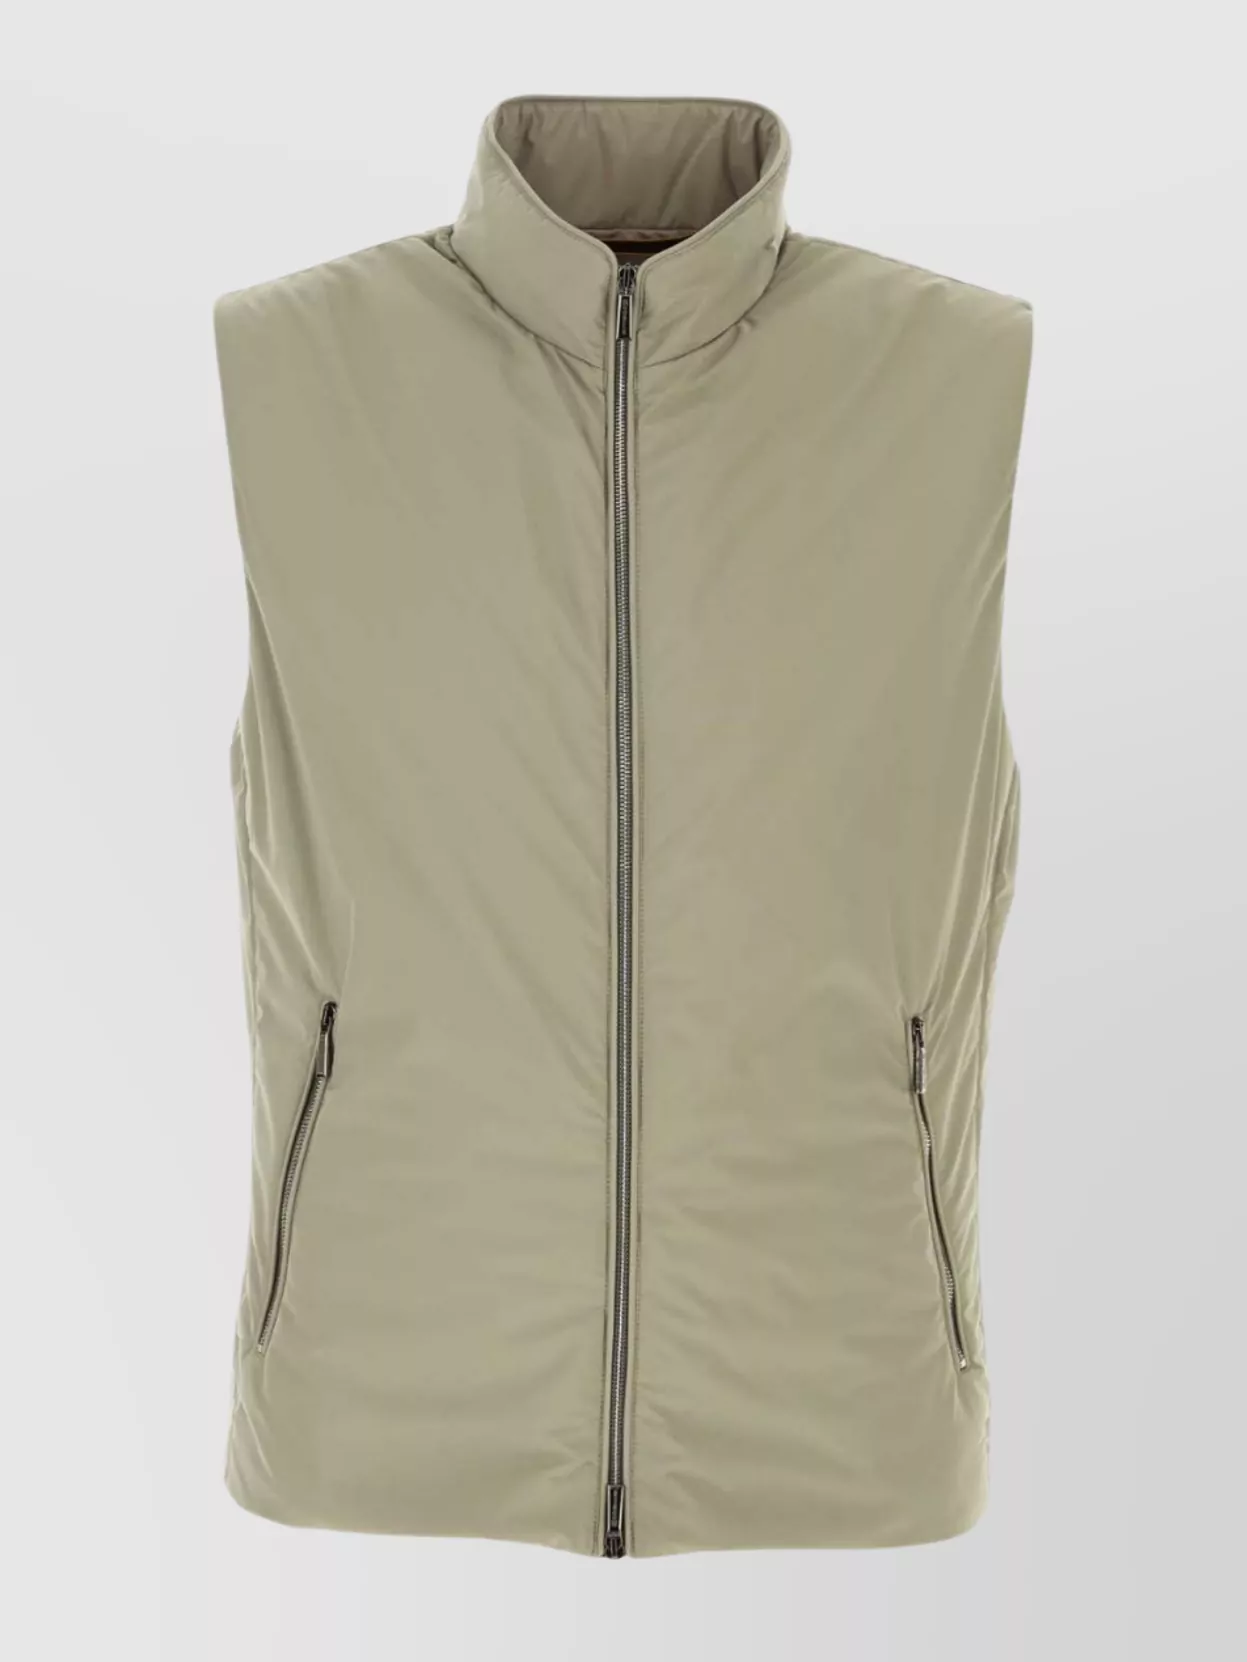 Shop Moorer Polyester Senio Sleeveless Jacket With High Collar And Zippered Side Pockets